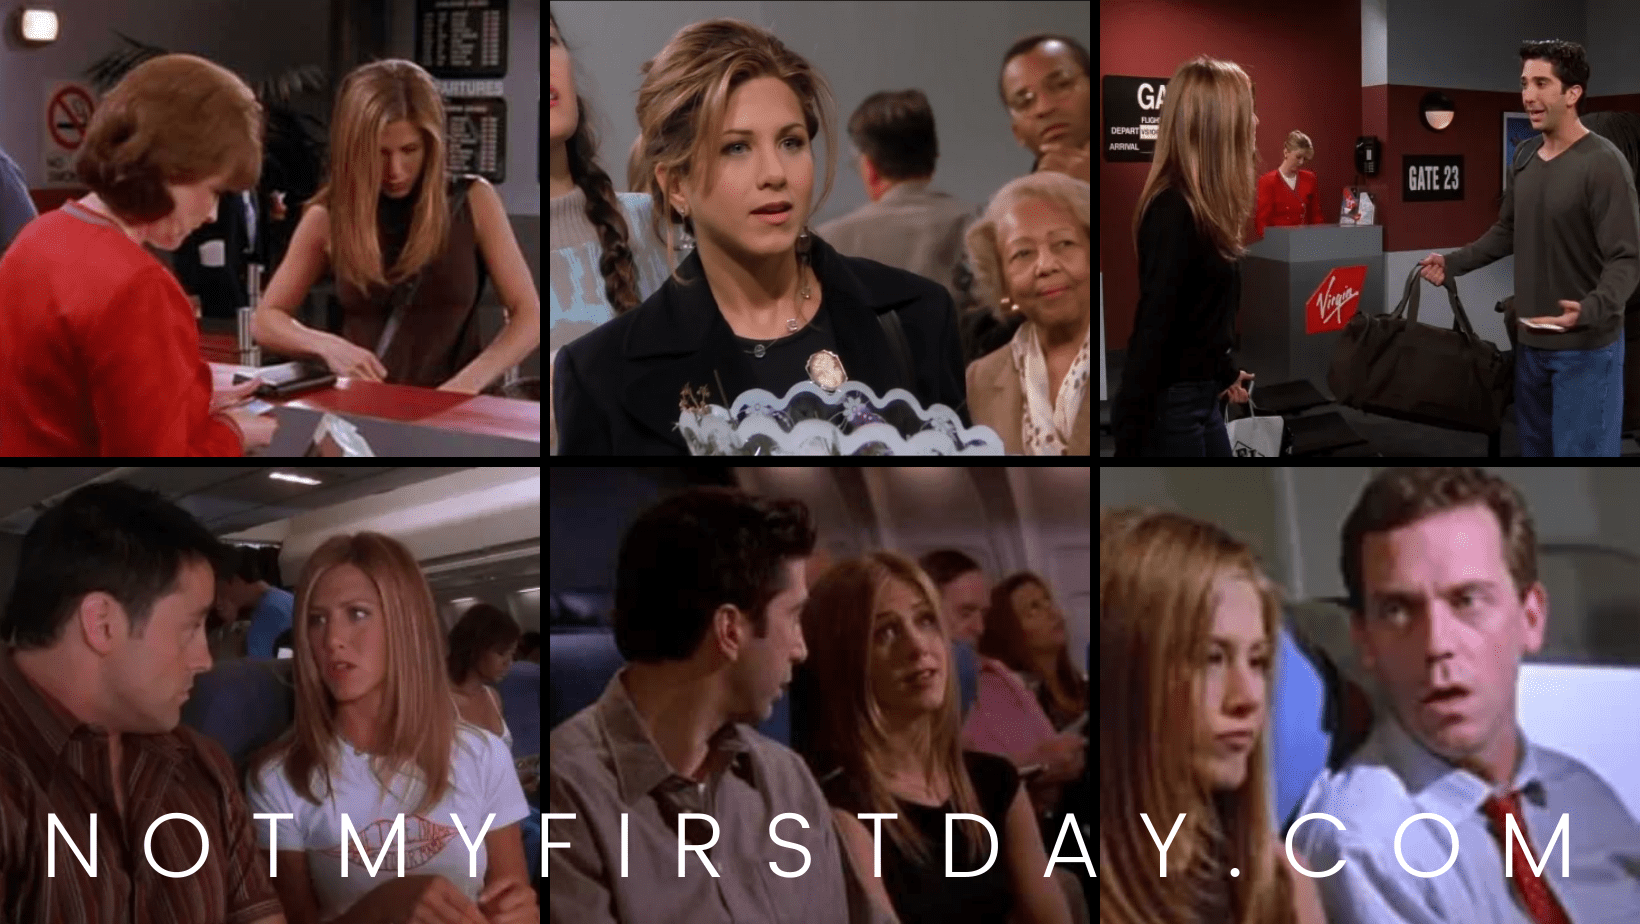 Rachel Green at the Airport | Always a Fiasco & Always Includes Ross